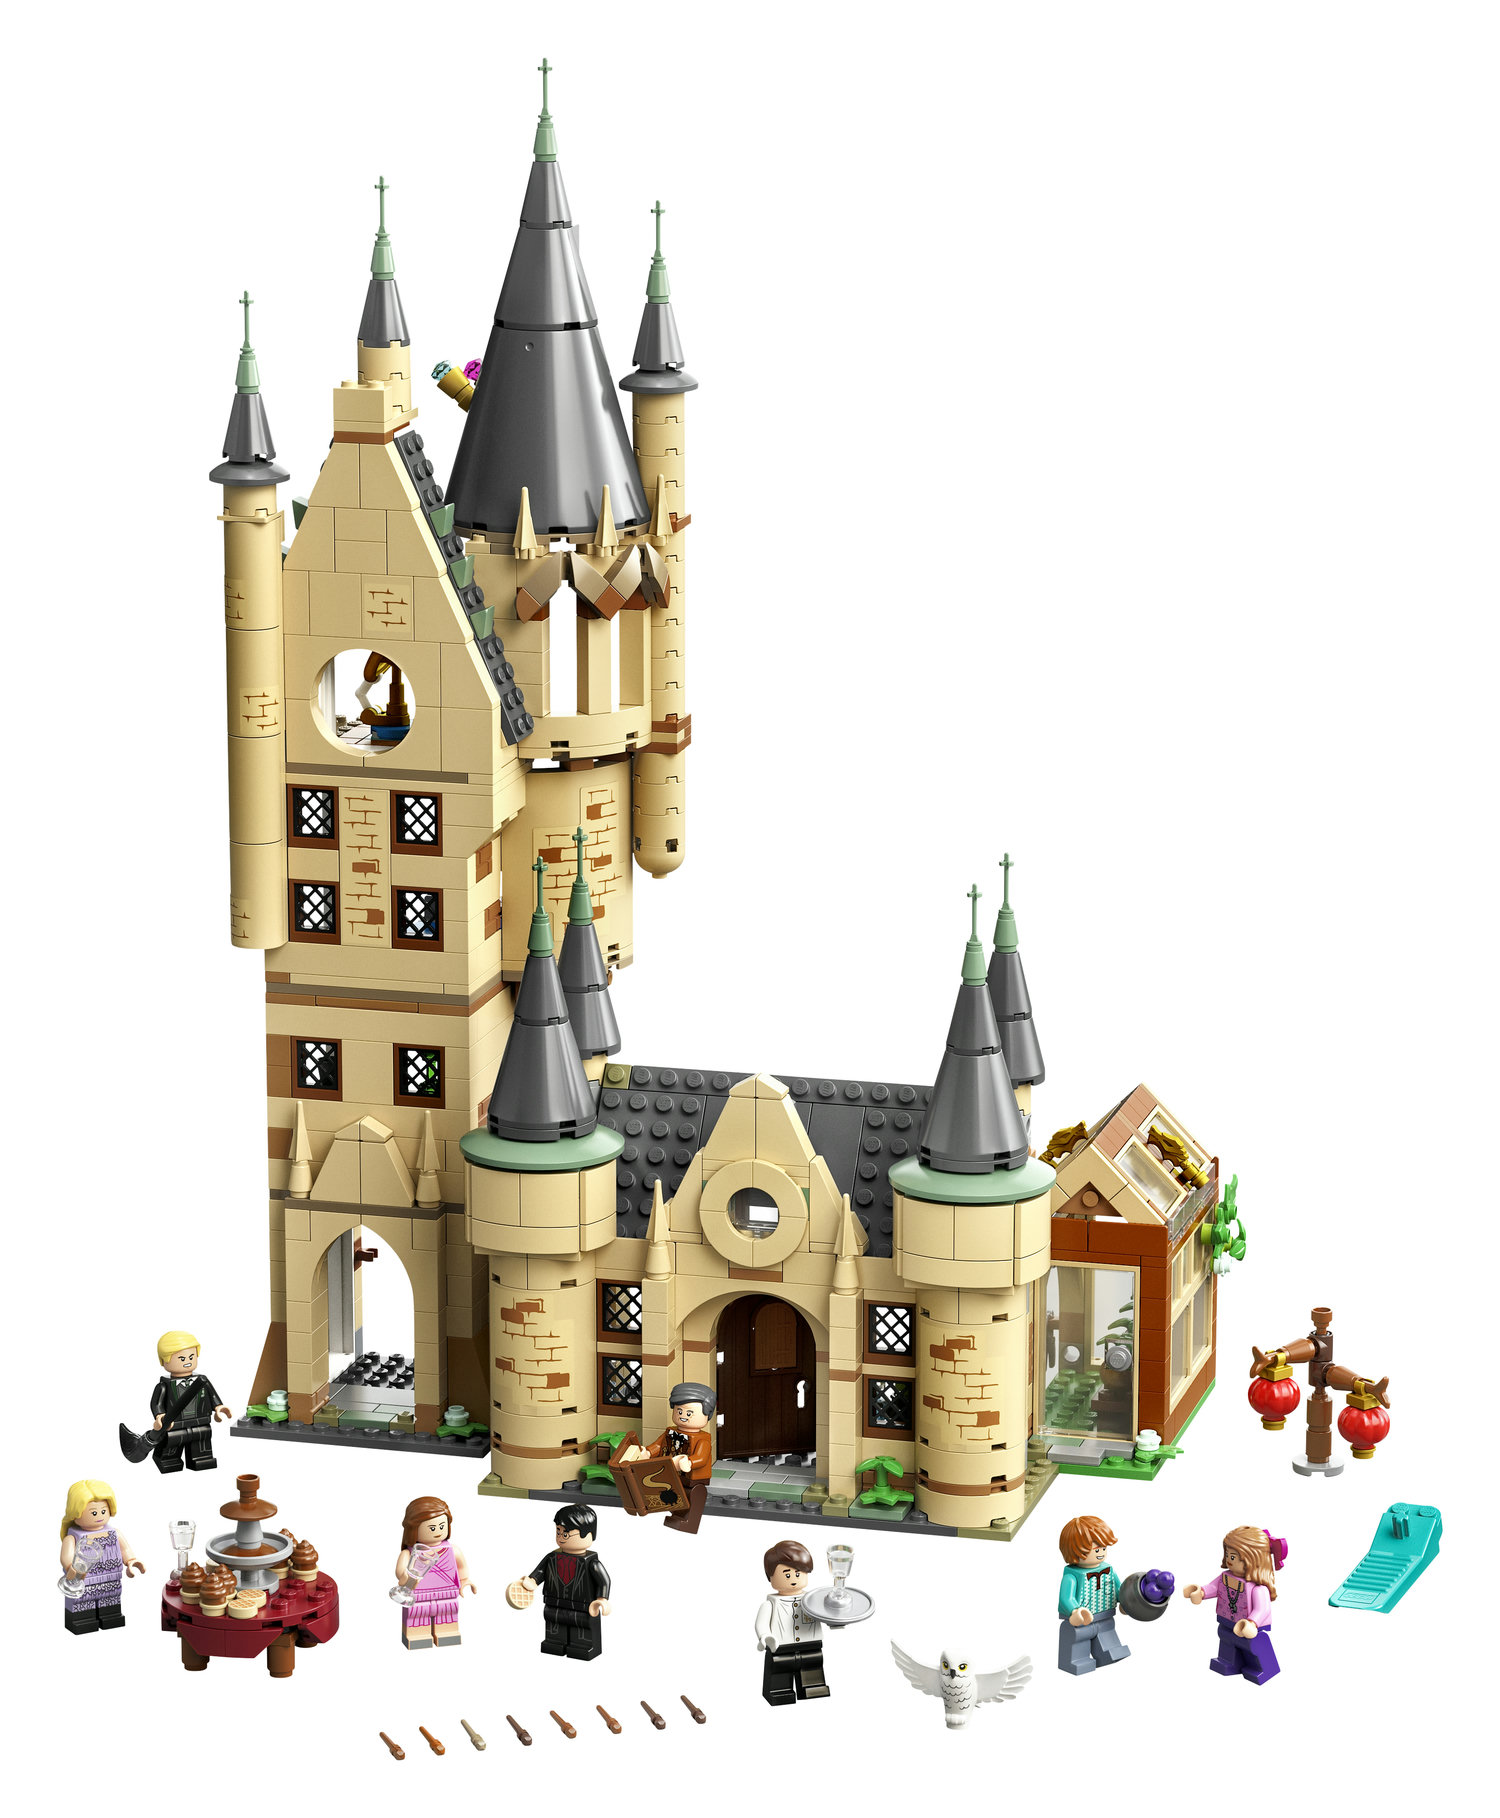 LEGO Harry Potter Hogwarts Astronomy Tower 75969 Cool Kids' Magic Castle Gift, Building Toy with Minifigures (971 Pieces) $80 at Walmart